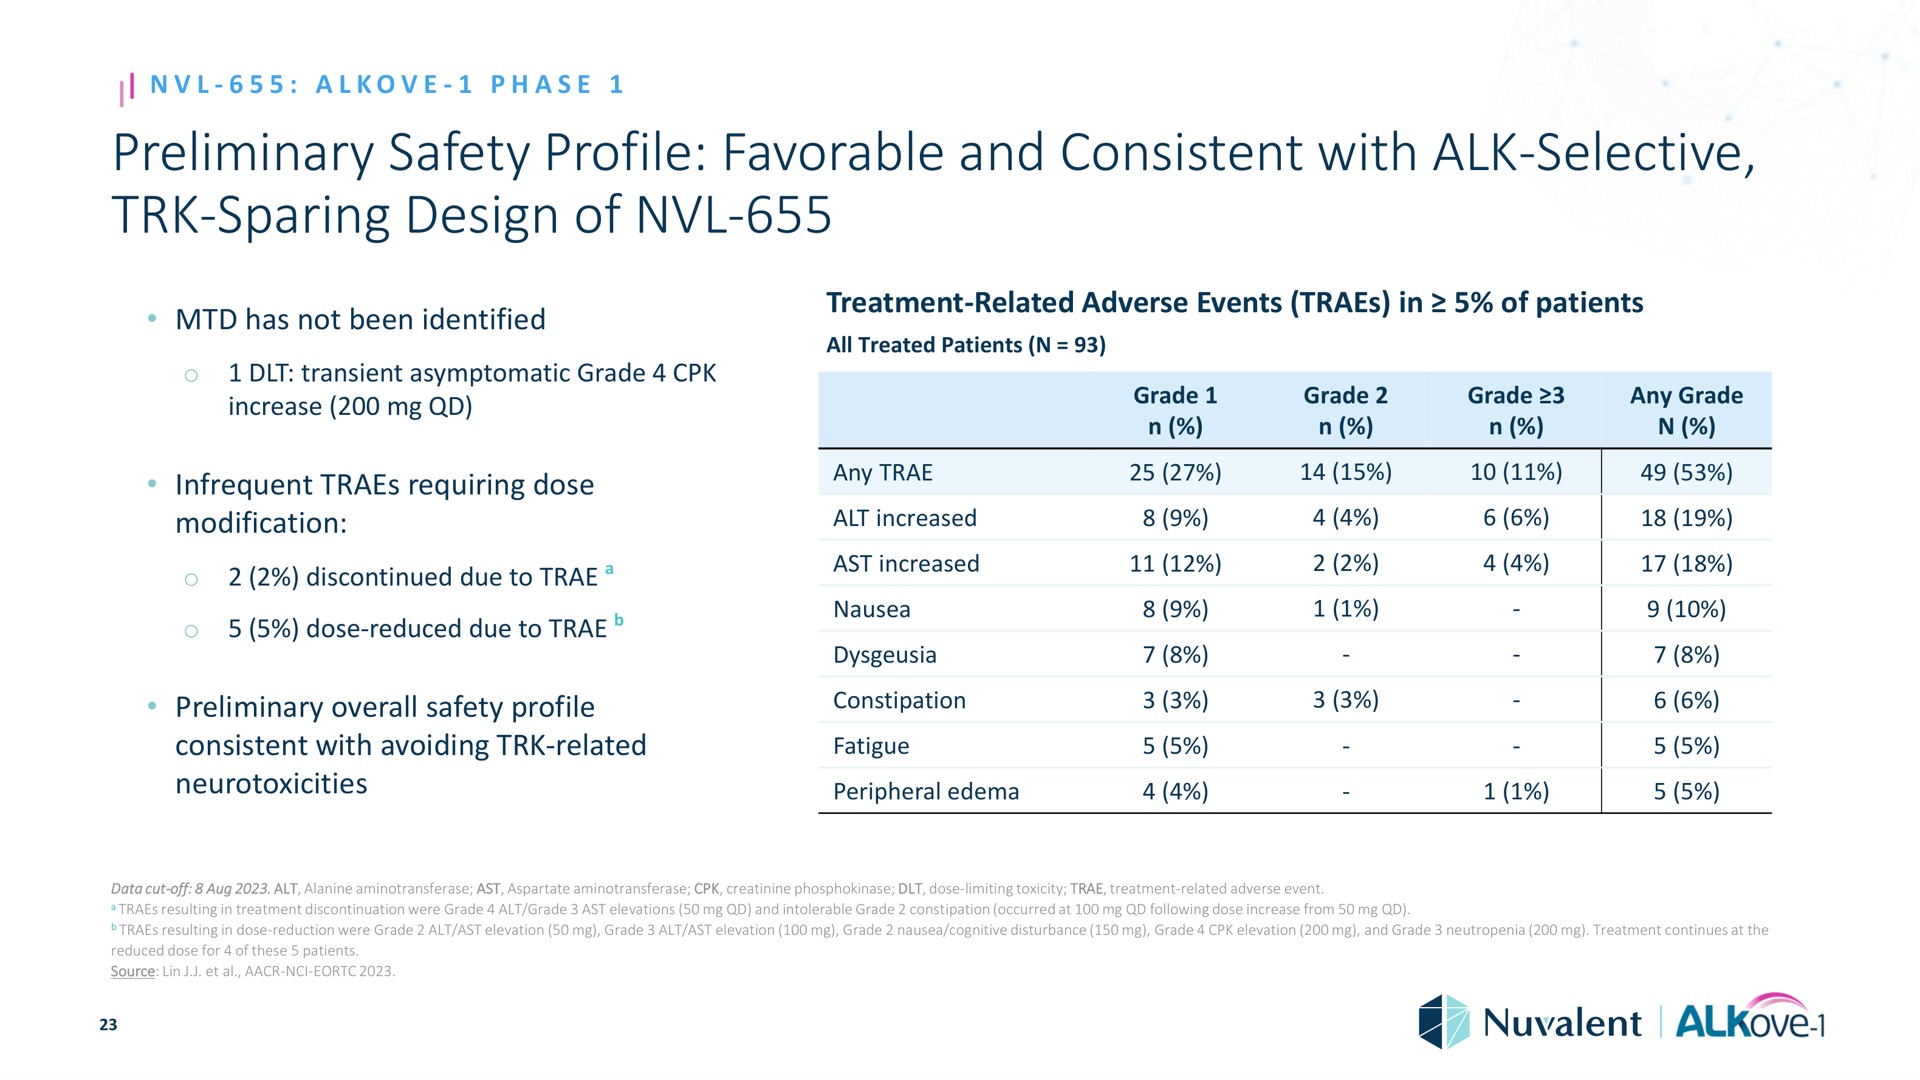 preliminary safety profile favorable and consistent with alk selective sparing design of phase treatment related adverse events in patients all treated patients has not been identified transient asymptomatic grade increase infrequent requiring dose modification discontinued due to dose reduced due to overall avoiding related any alt increased ast increased i nausea constipation fatigue peripheral edema grade grade grade any grade reduced dose for source lin a creatinine dose limiting toxicity treatment related adverse event intolerable at from grade alt ast elevation grade nausea cognitive disturbance grade elevation grade treatment continues at the | Nuvalent